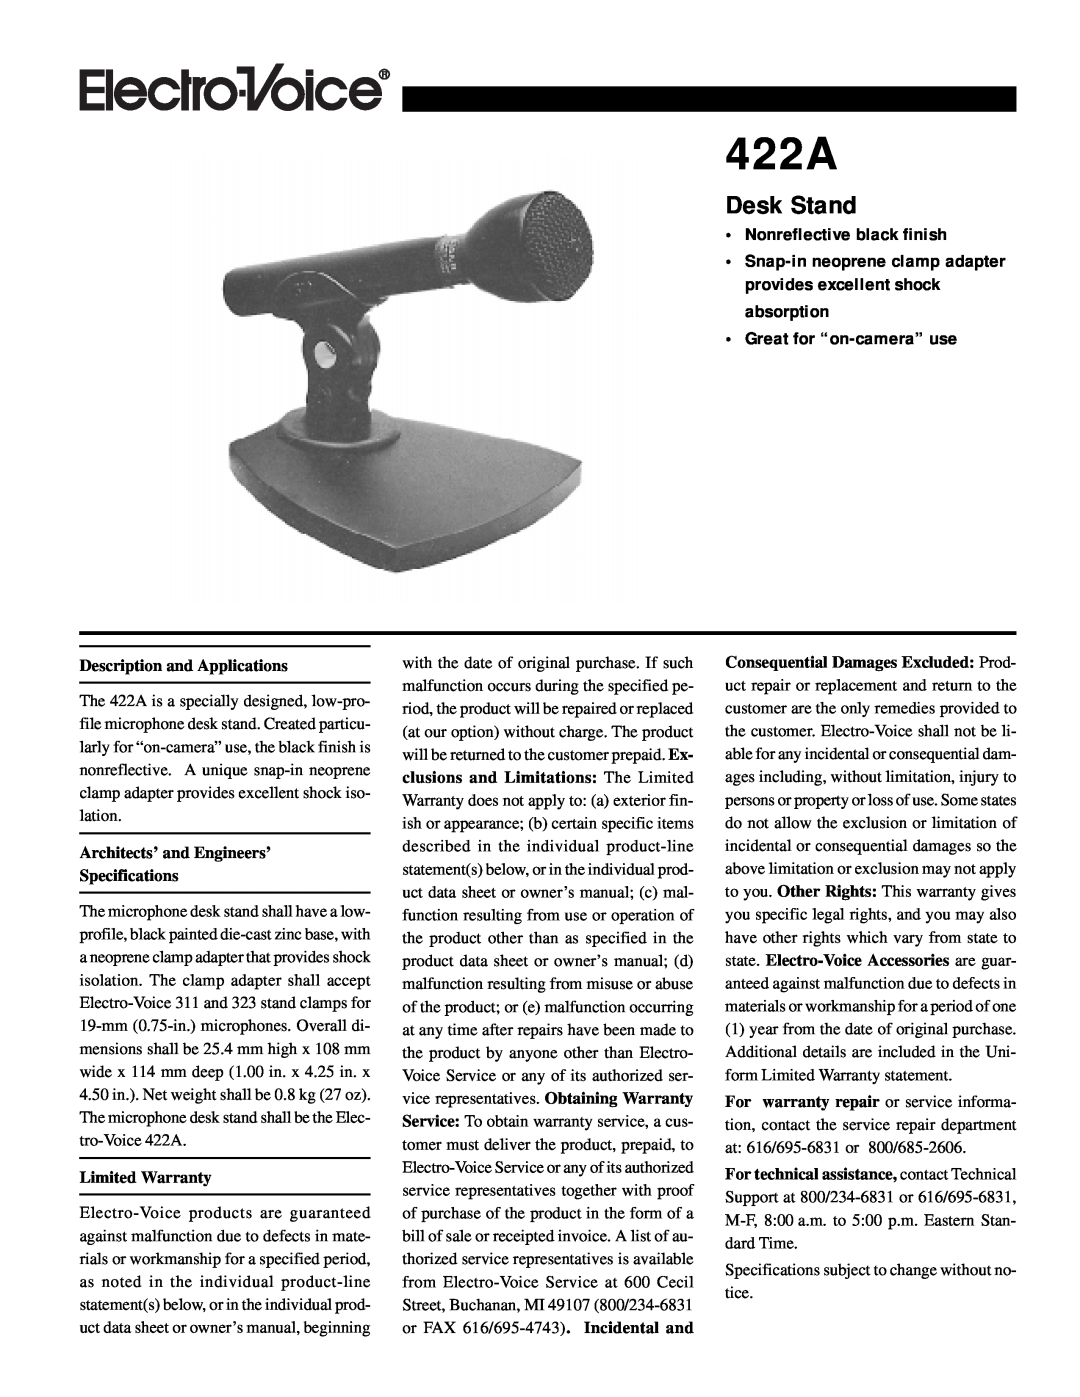 Electro-Voice 422A specifications Description and Applications, Architects’ and Engineers’ Specifications, Desk Stand 